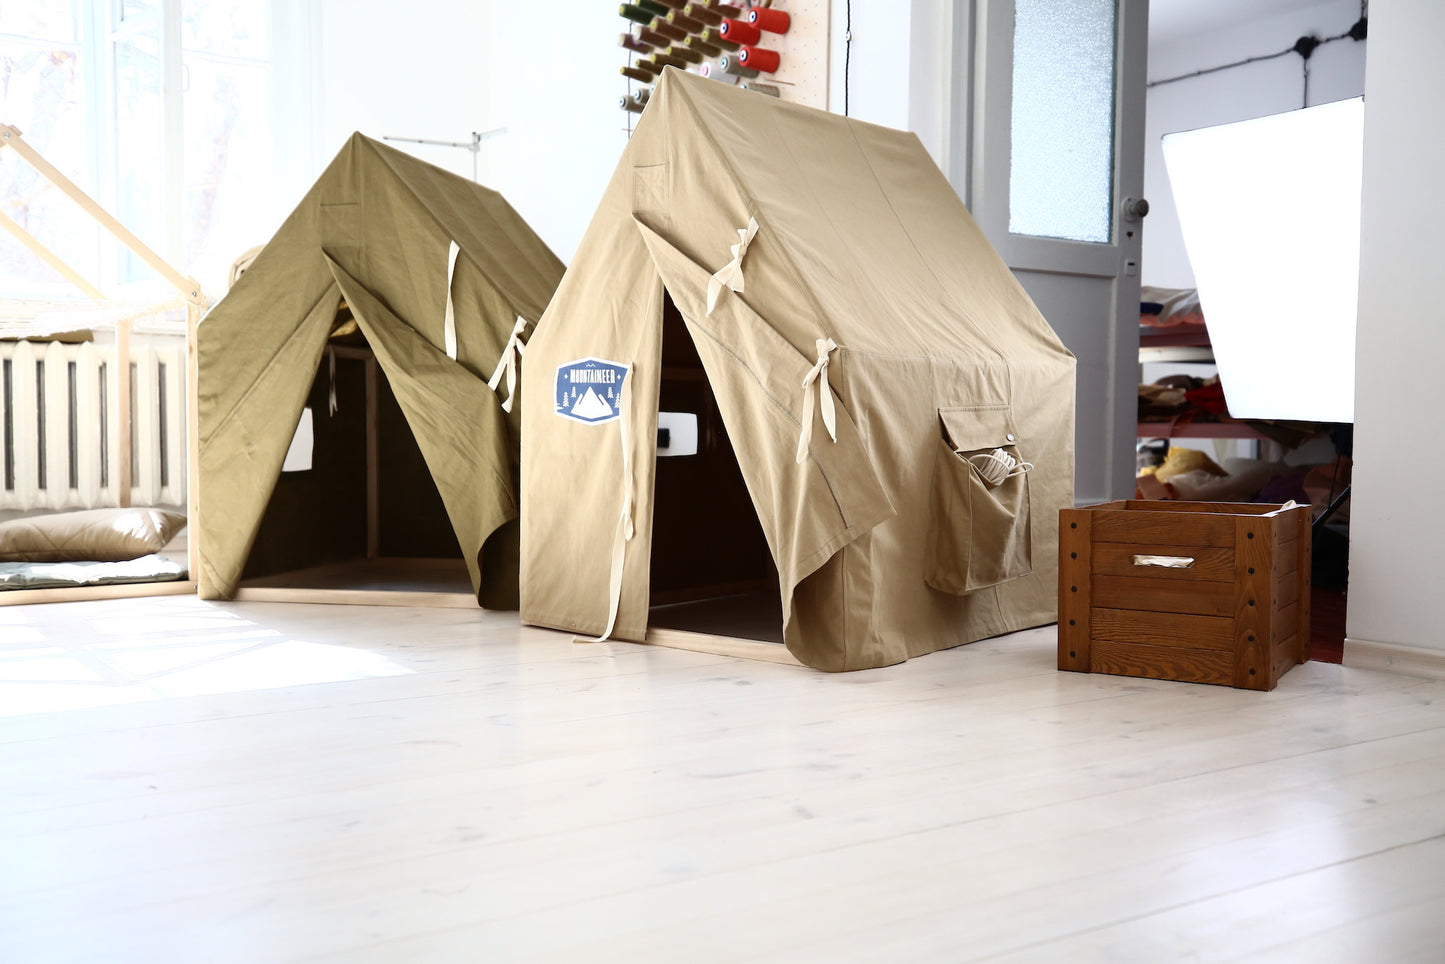 Bedouin Tent / Small Tents For Sale / Best Kids Teepee / Boys Teepee Tent / Tall Playhouse / Bell Tent For Sale/ 1st birthday